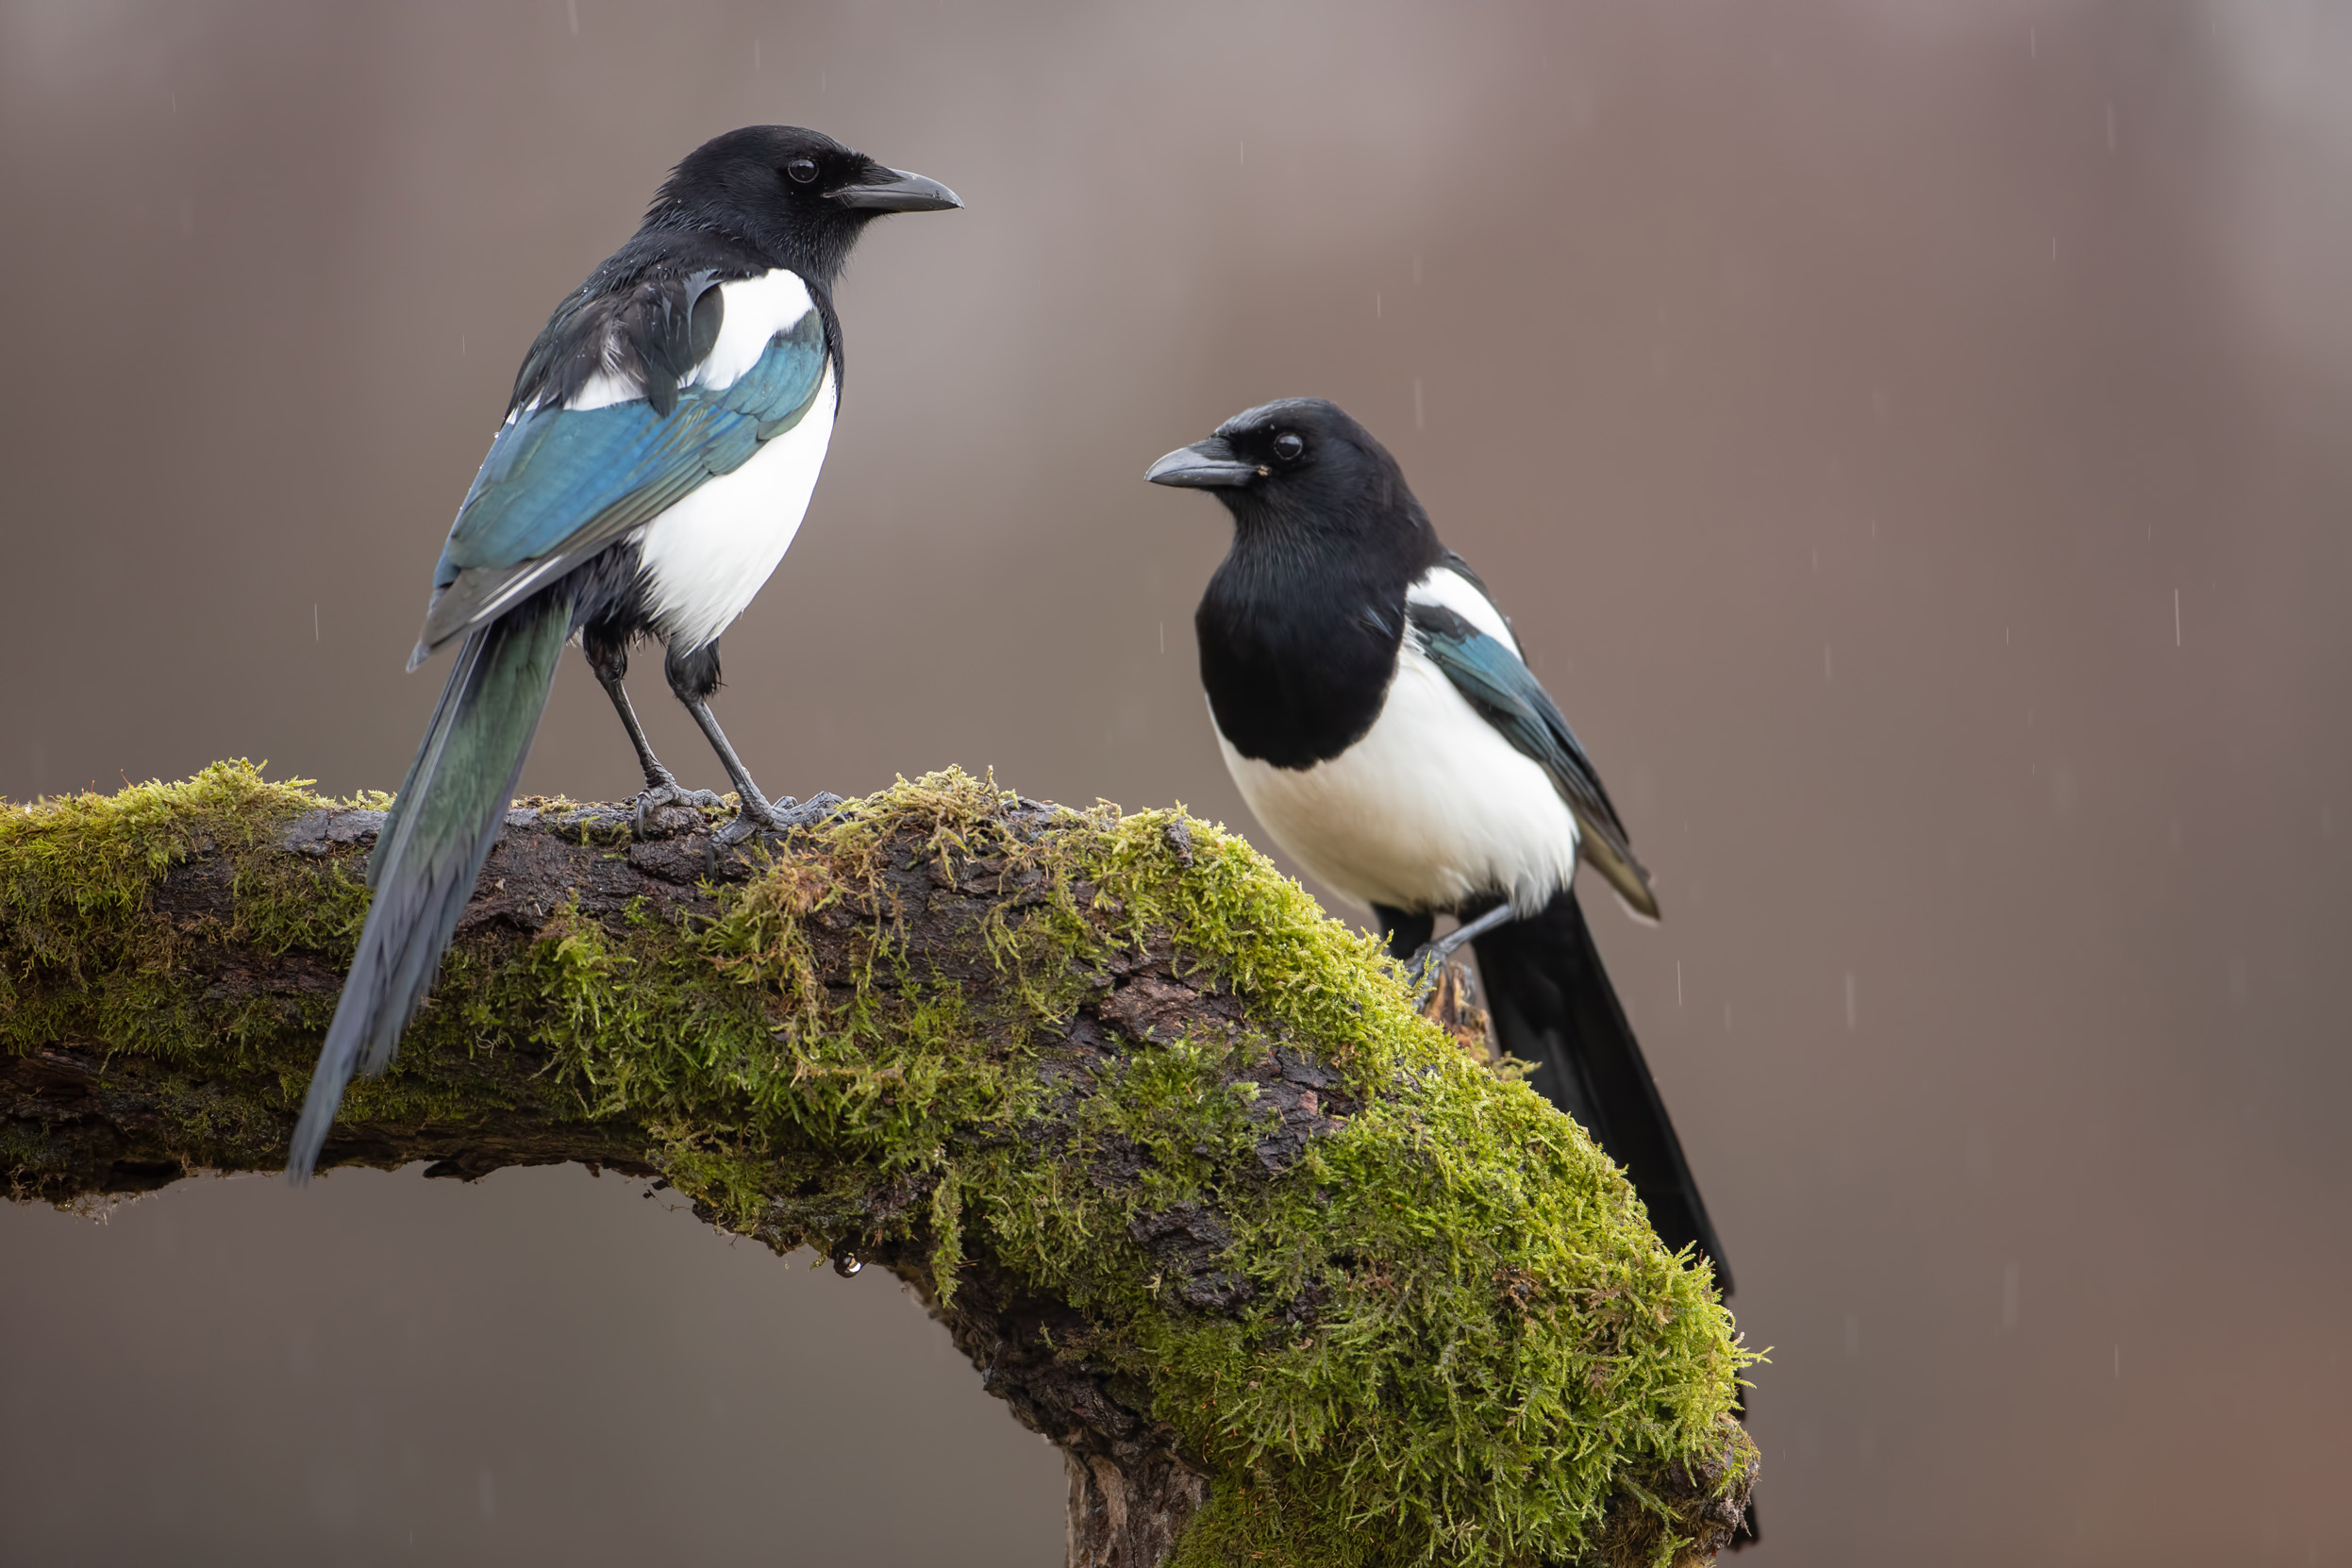 A pair of Magpies perched on a moss covered log in the rain.